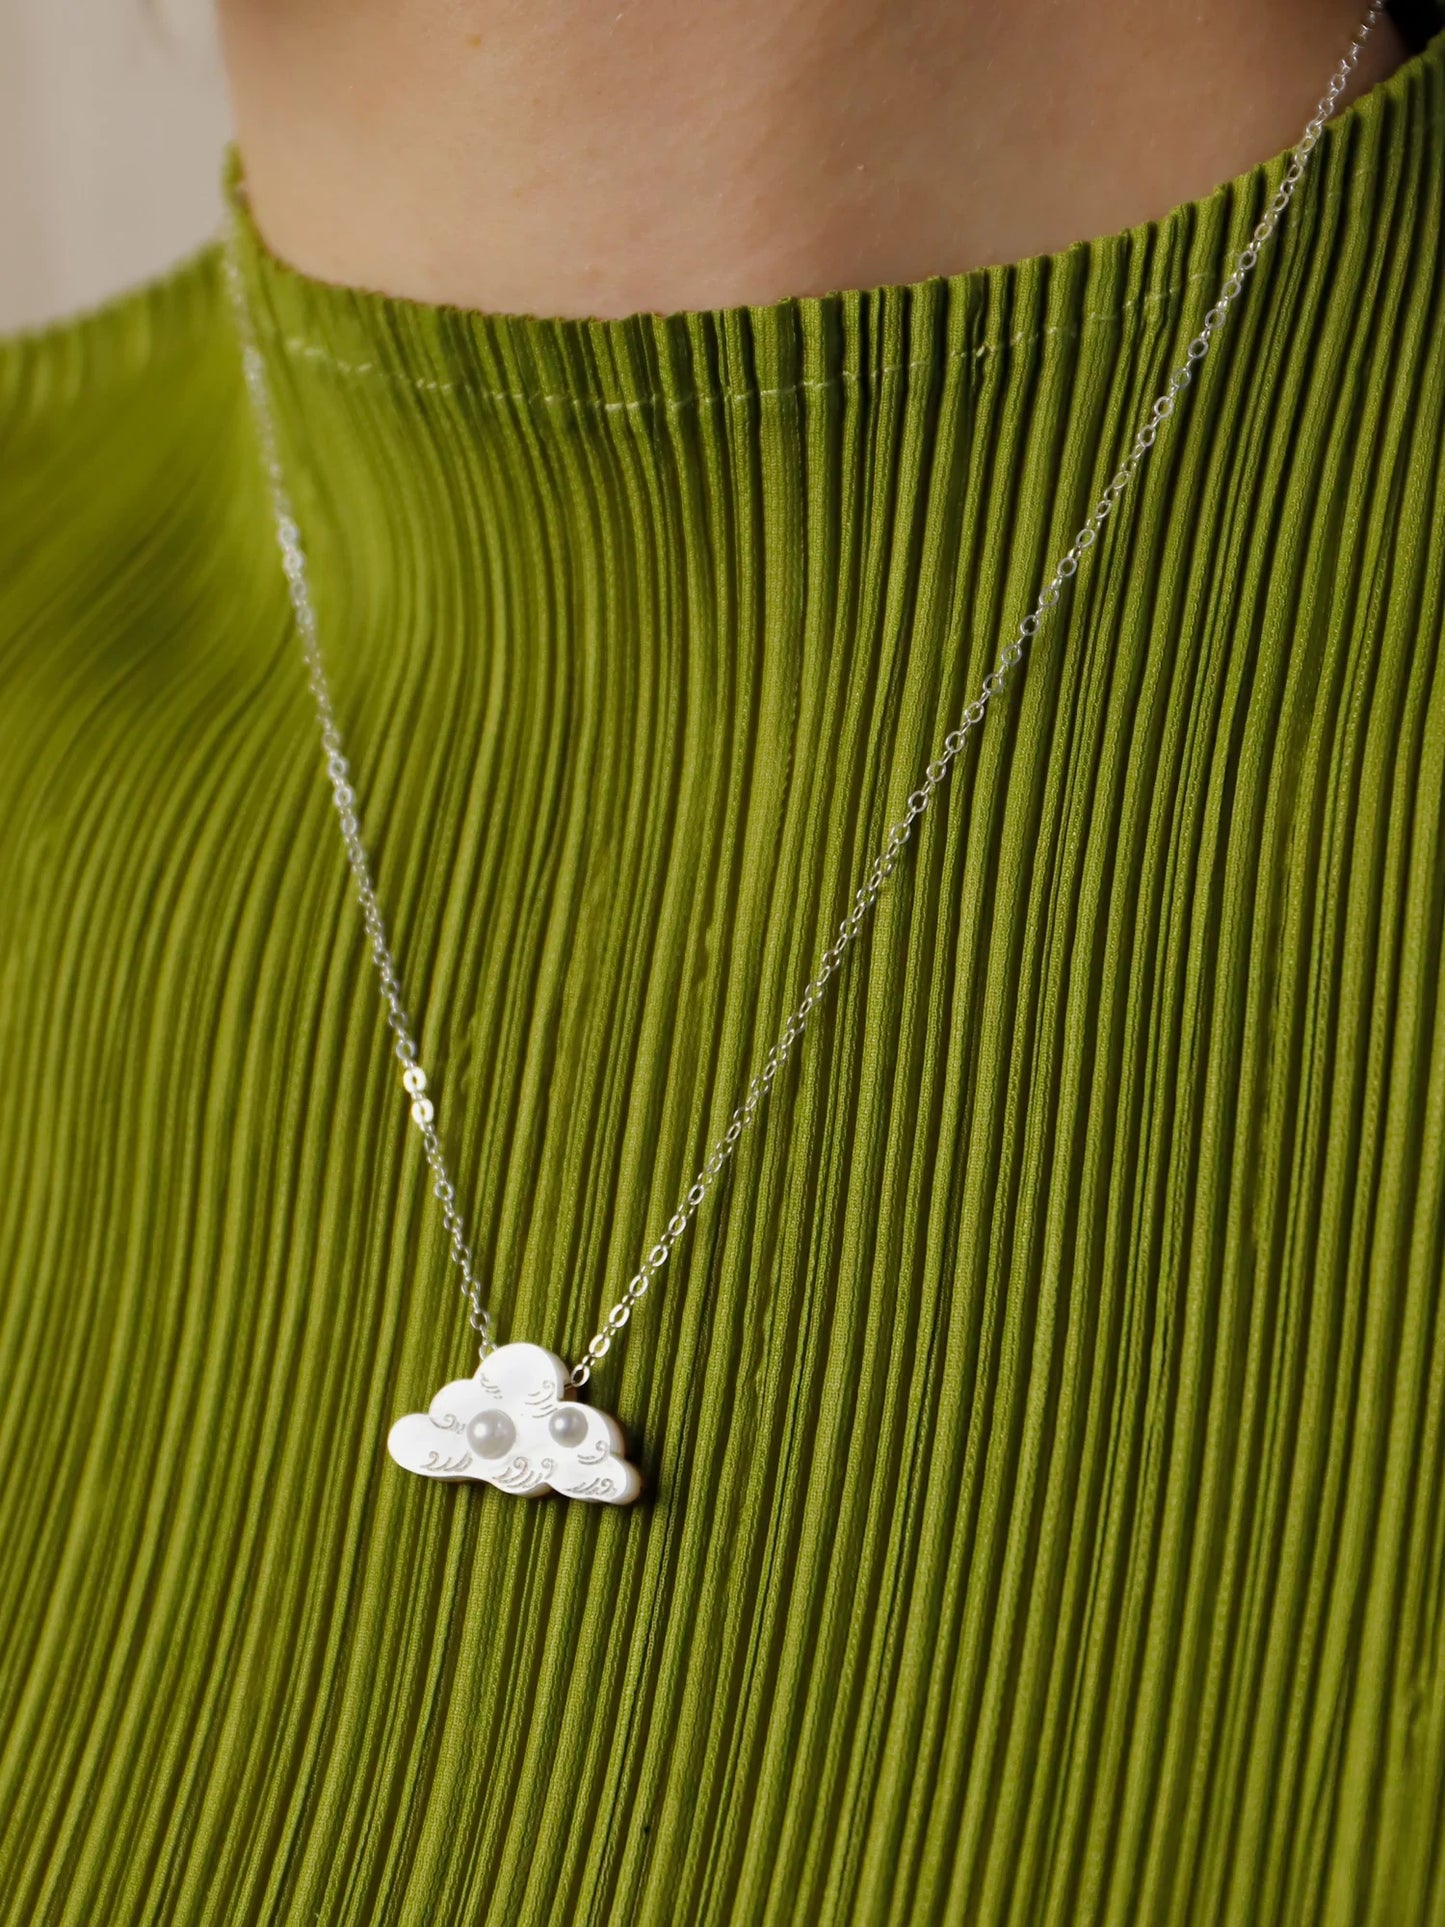 The Every Space Cloud necklace in sterling silver and acrylic by Wolf & Moon